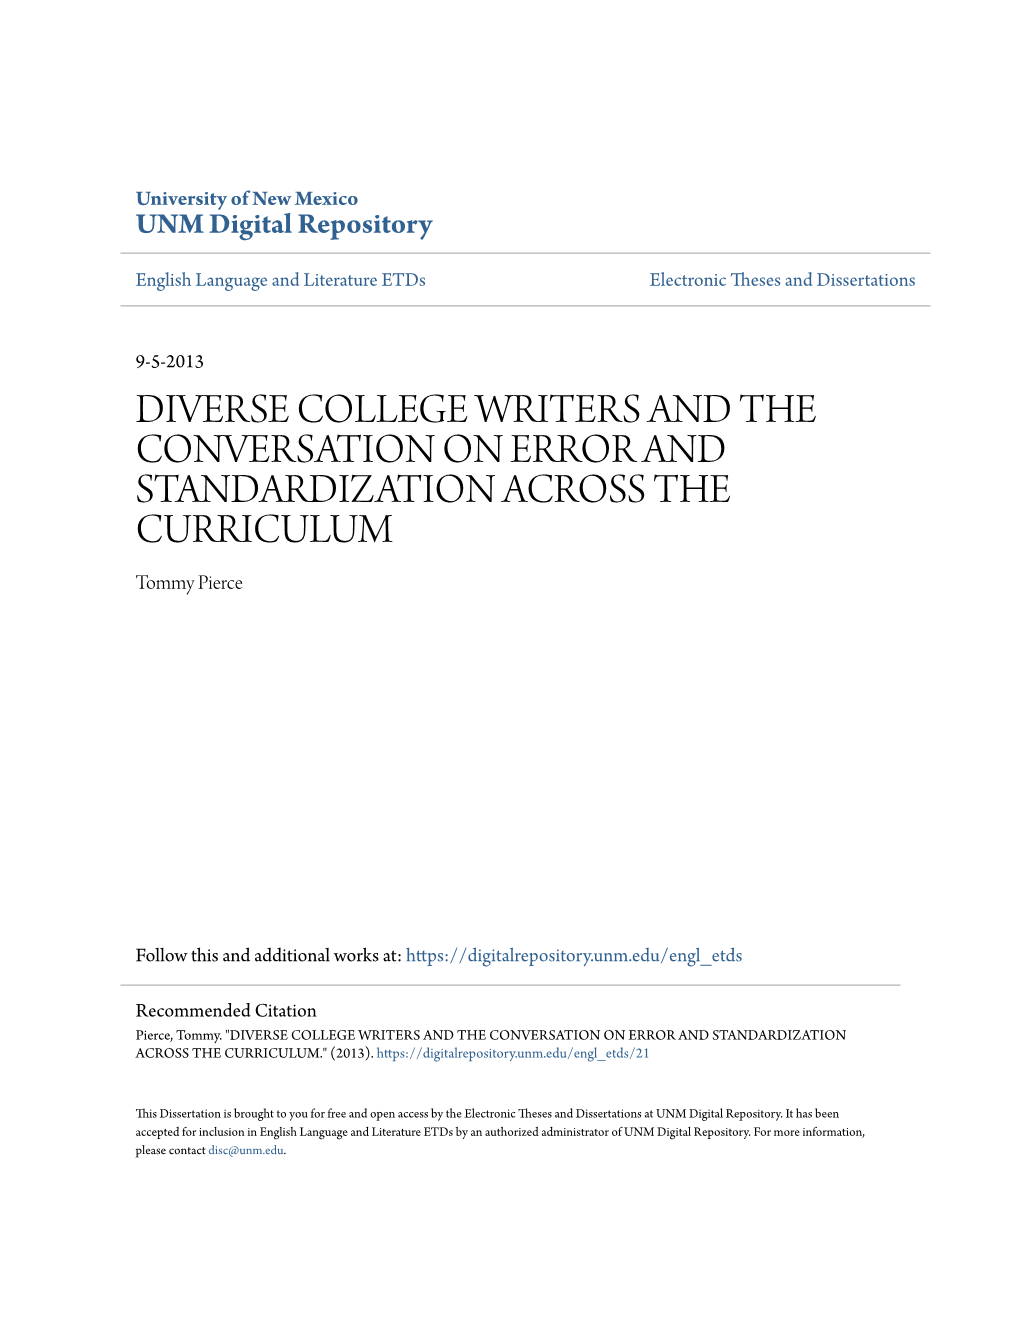 DIVERSE COLLEGE WRITERS and the CONVERSATION on ERROR and STANDARDIZATION ACROSS the CURRICULUM Tommy Pierce